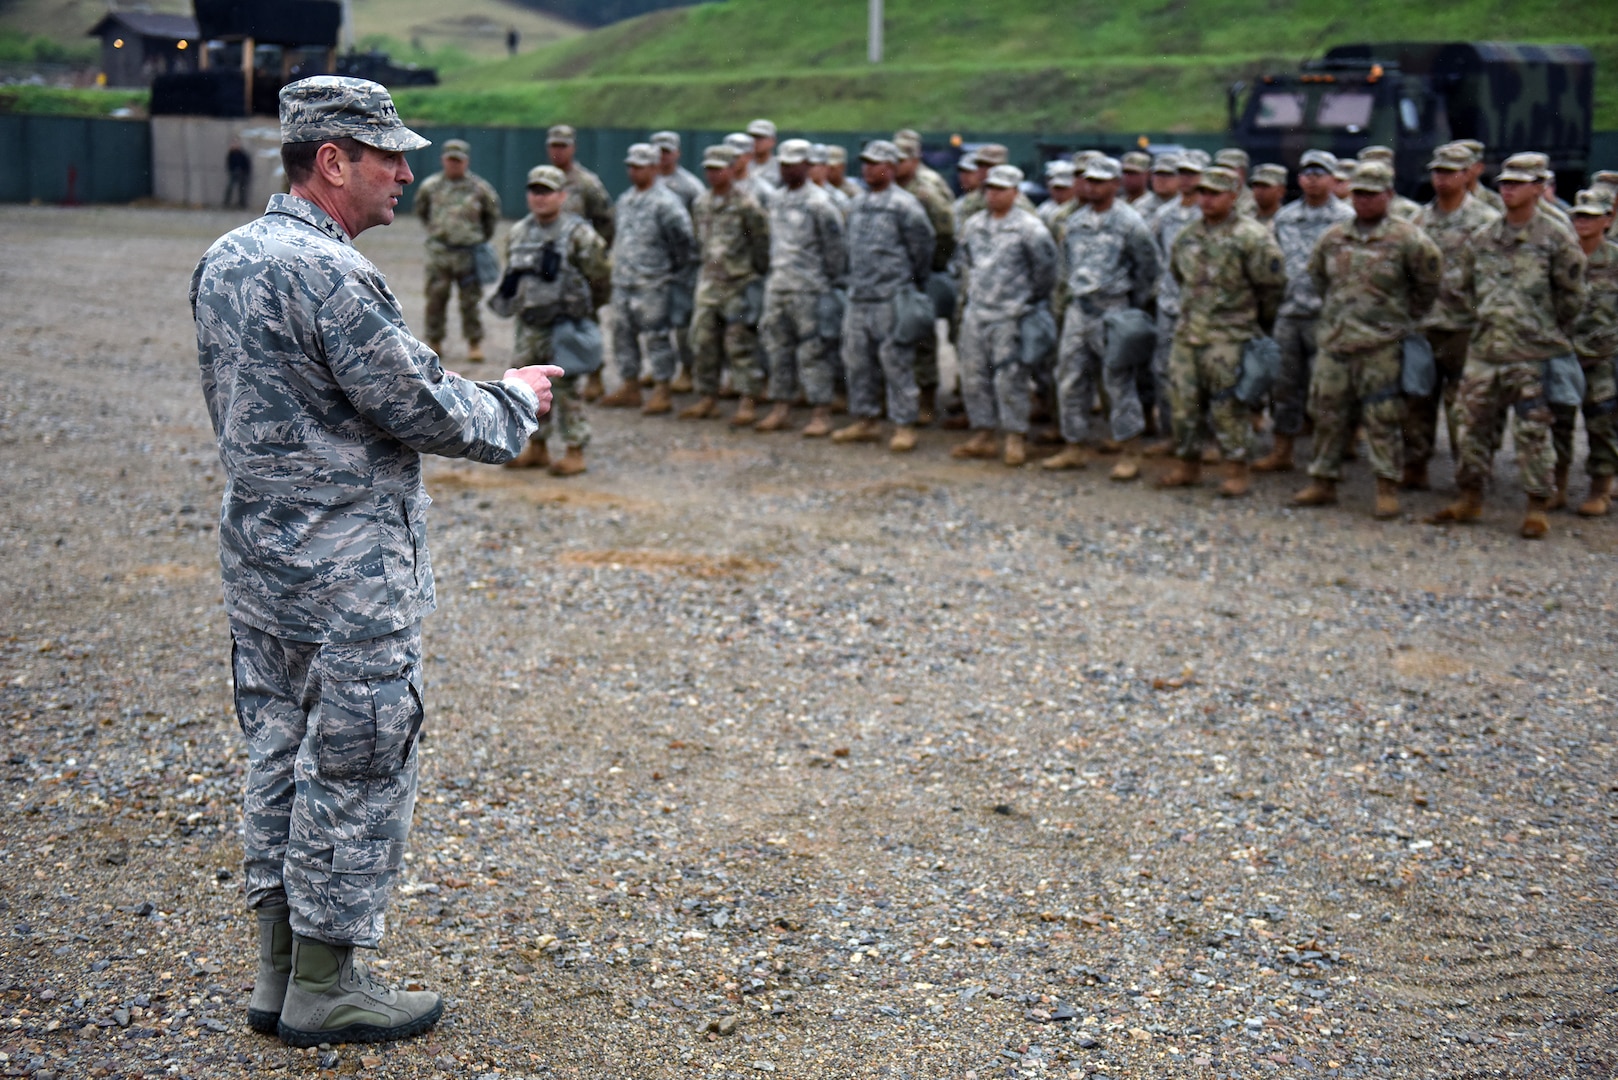 "We are raising our readiness," Air Force Gen. Joseph Lengyel, chief of the National Guard Bureau, said during visits with Guard members in South Korea, May 1-4, 2018. "It's our job."